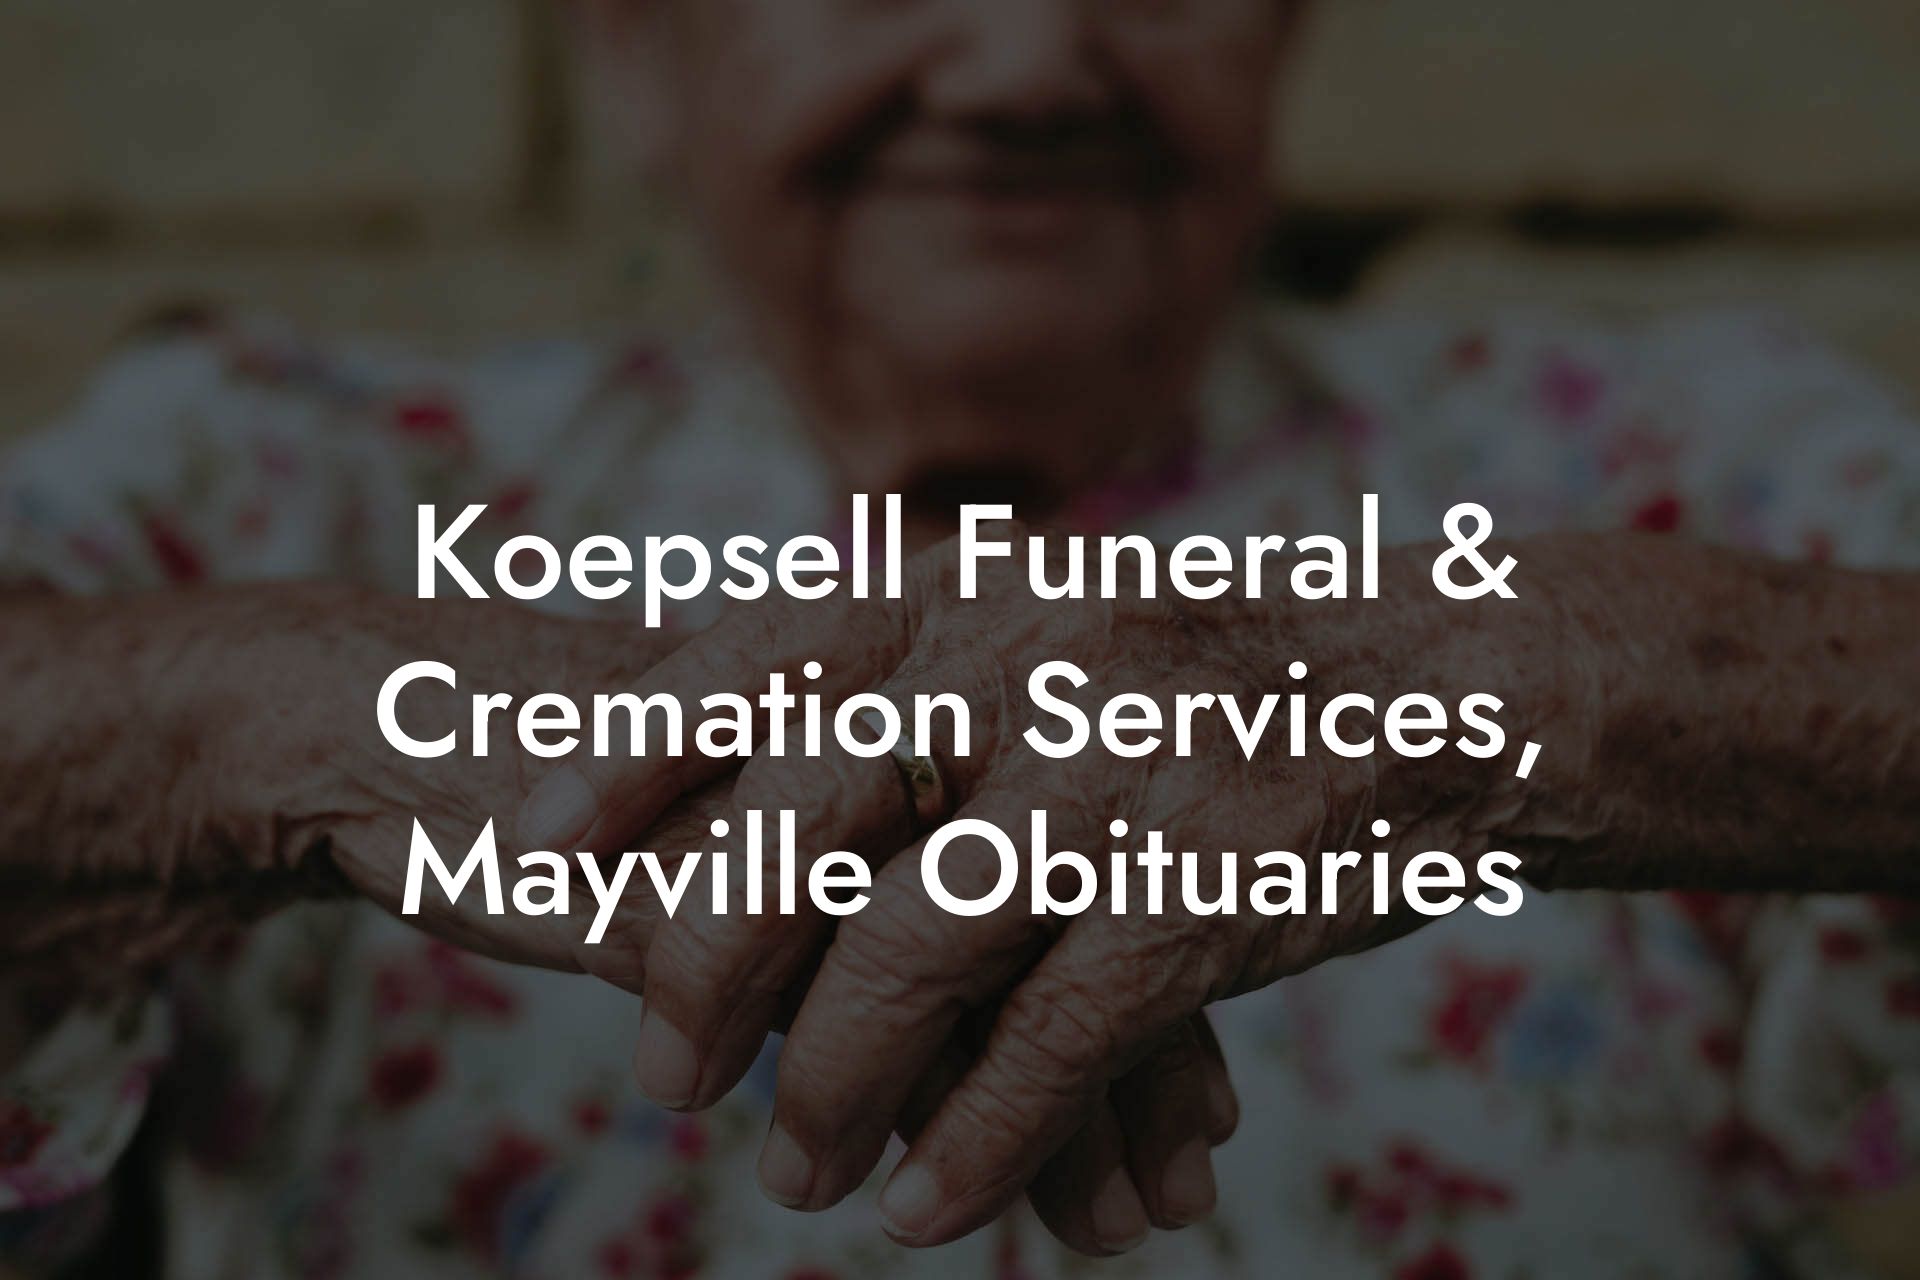 Koepsell Funeral & Cremation Services, Mayville Obituaries